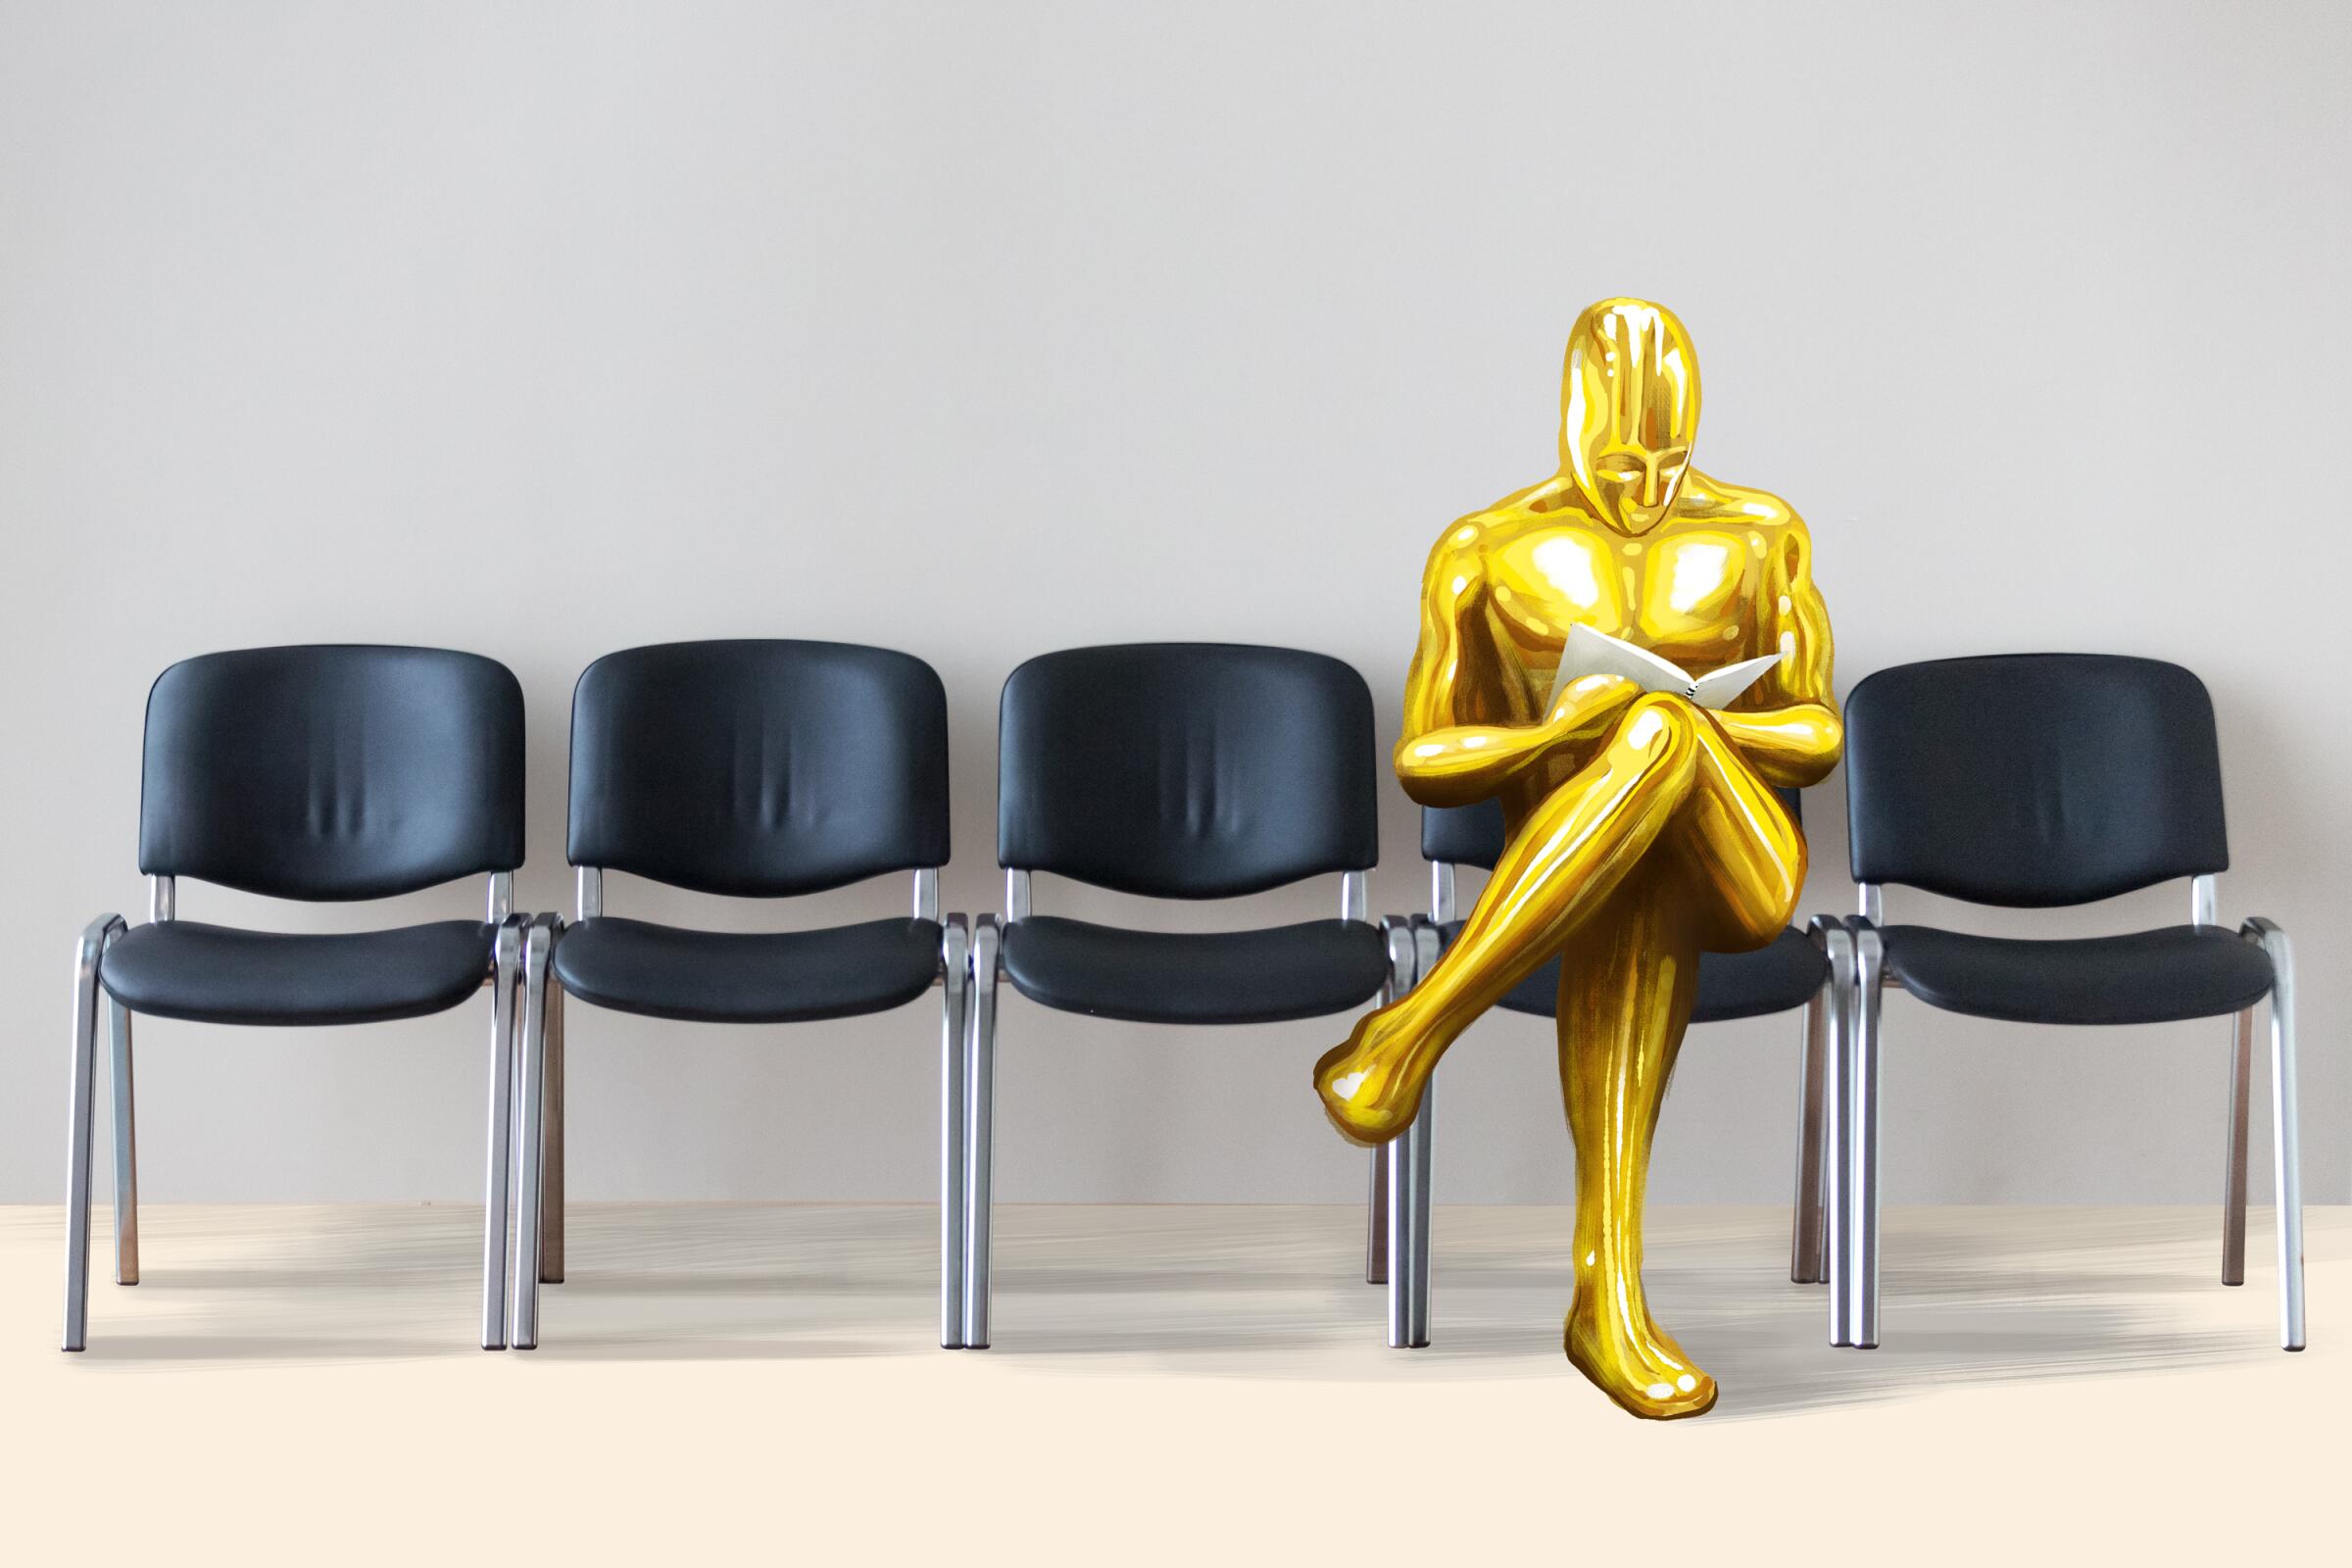 Illustration of Oscar statuette in a casting waiting room.